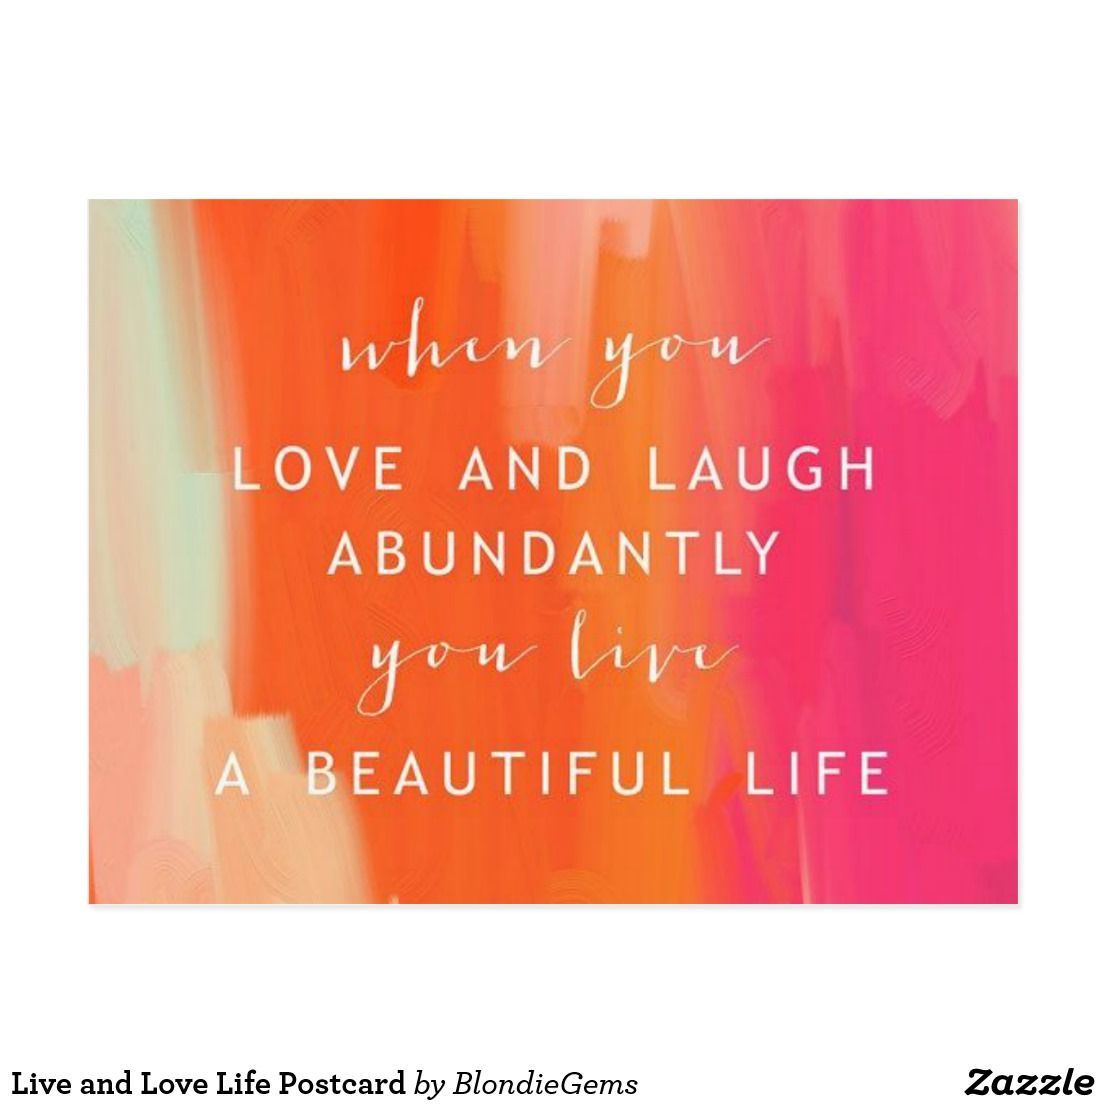 Live and Love Life Postcard - Live and Love Life Postcard -   19 beauty Images life ideas